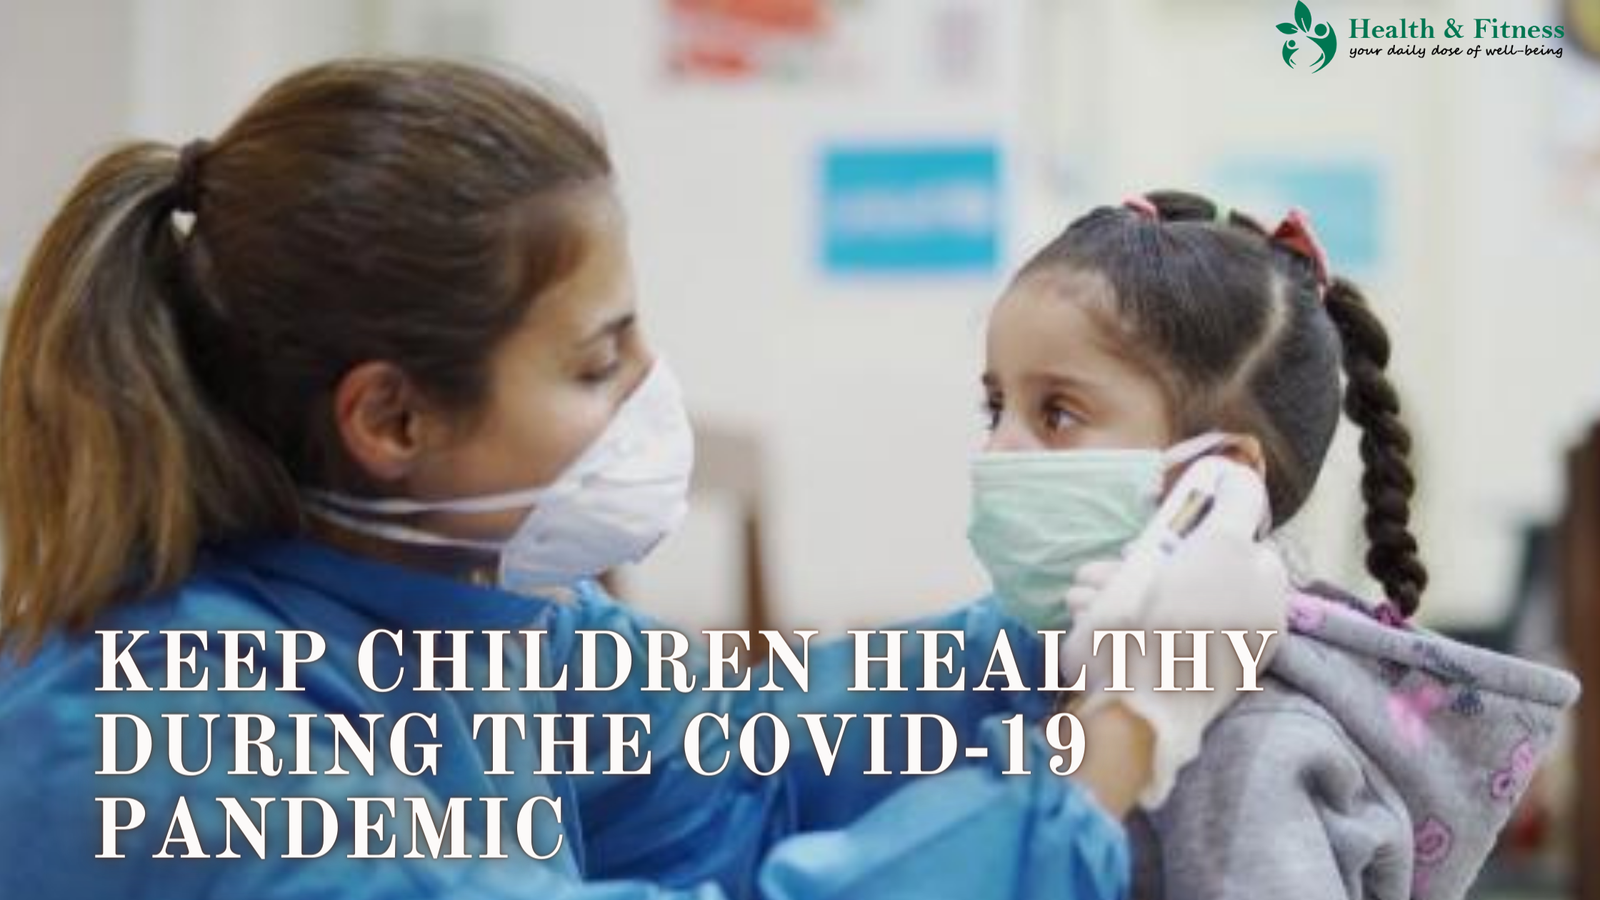 Keep Children Healthy during the COVID-19 Pandemic